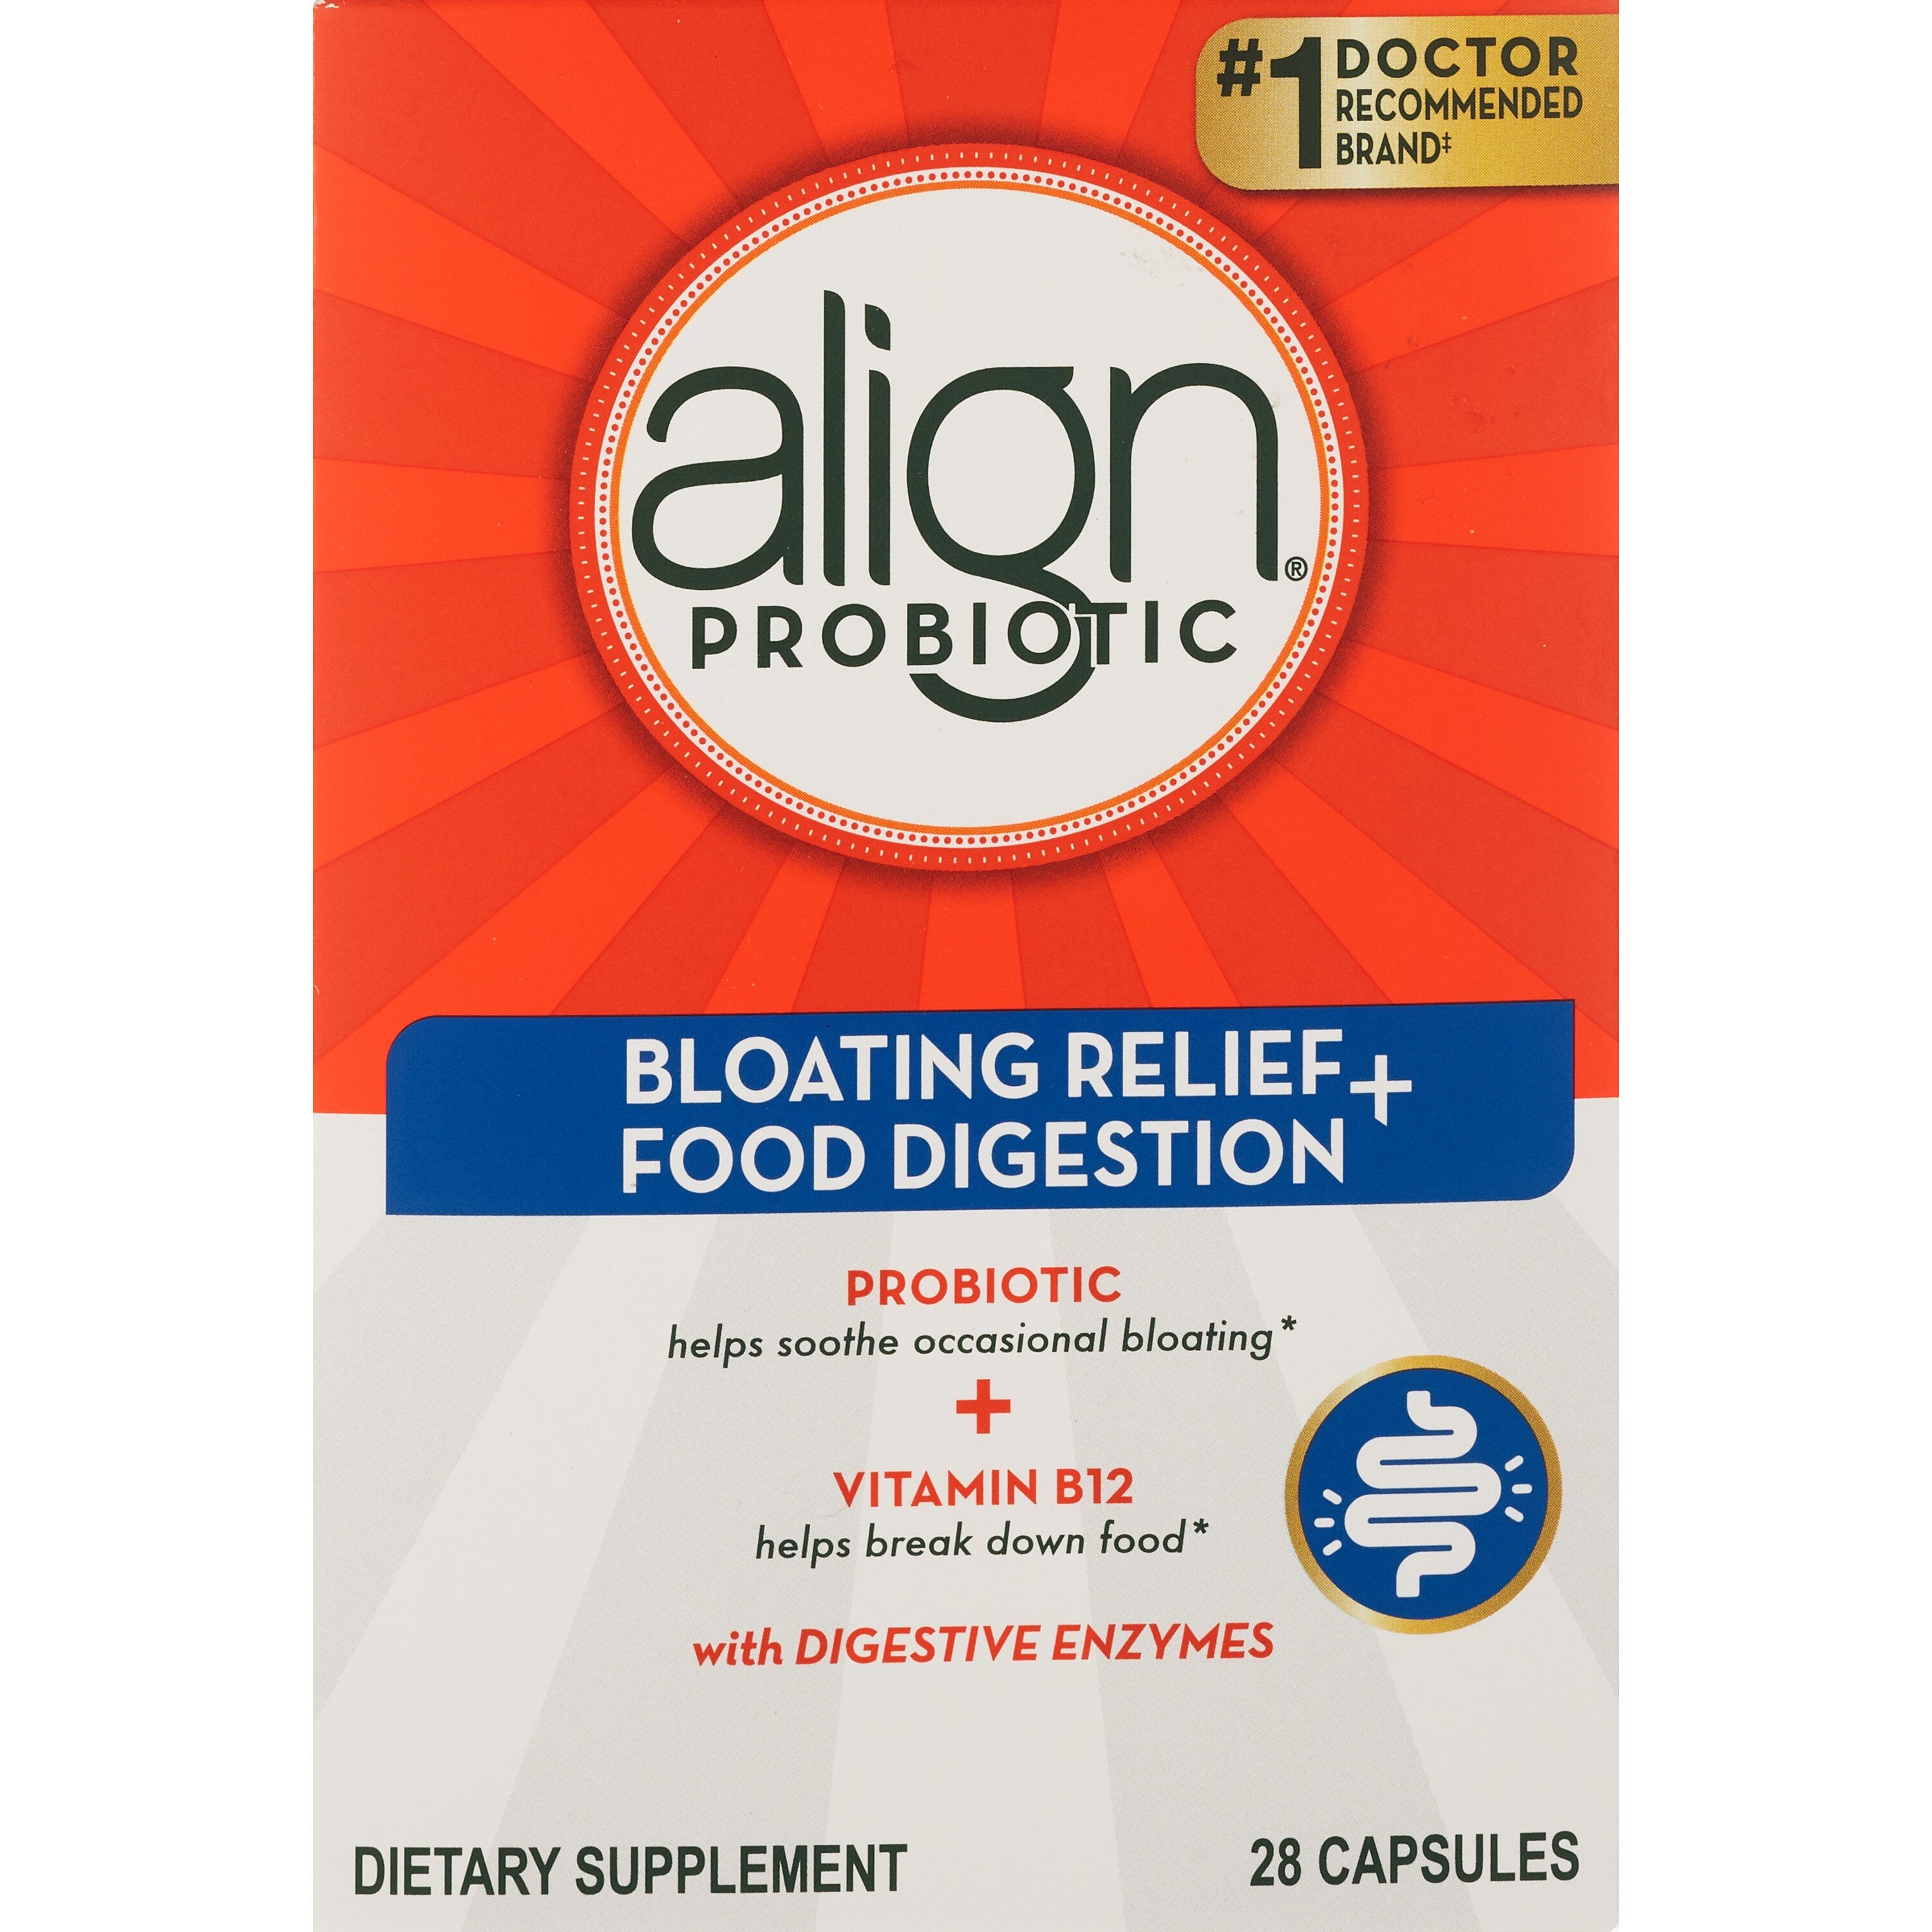 Align Probiotic Bloating Relief + Food Digestion, 28 Capsules